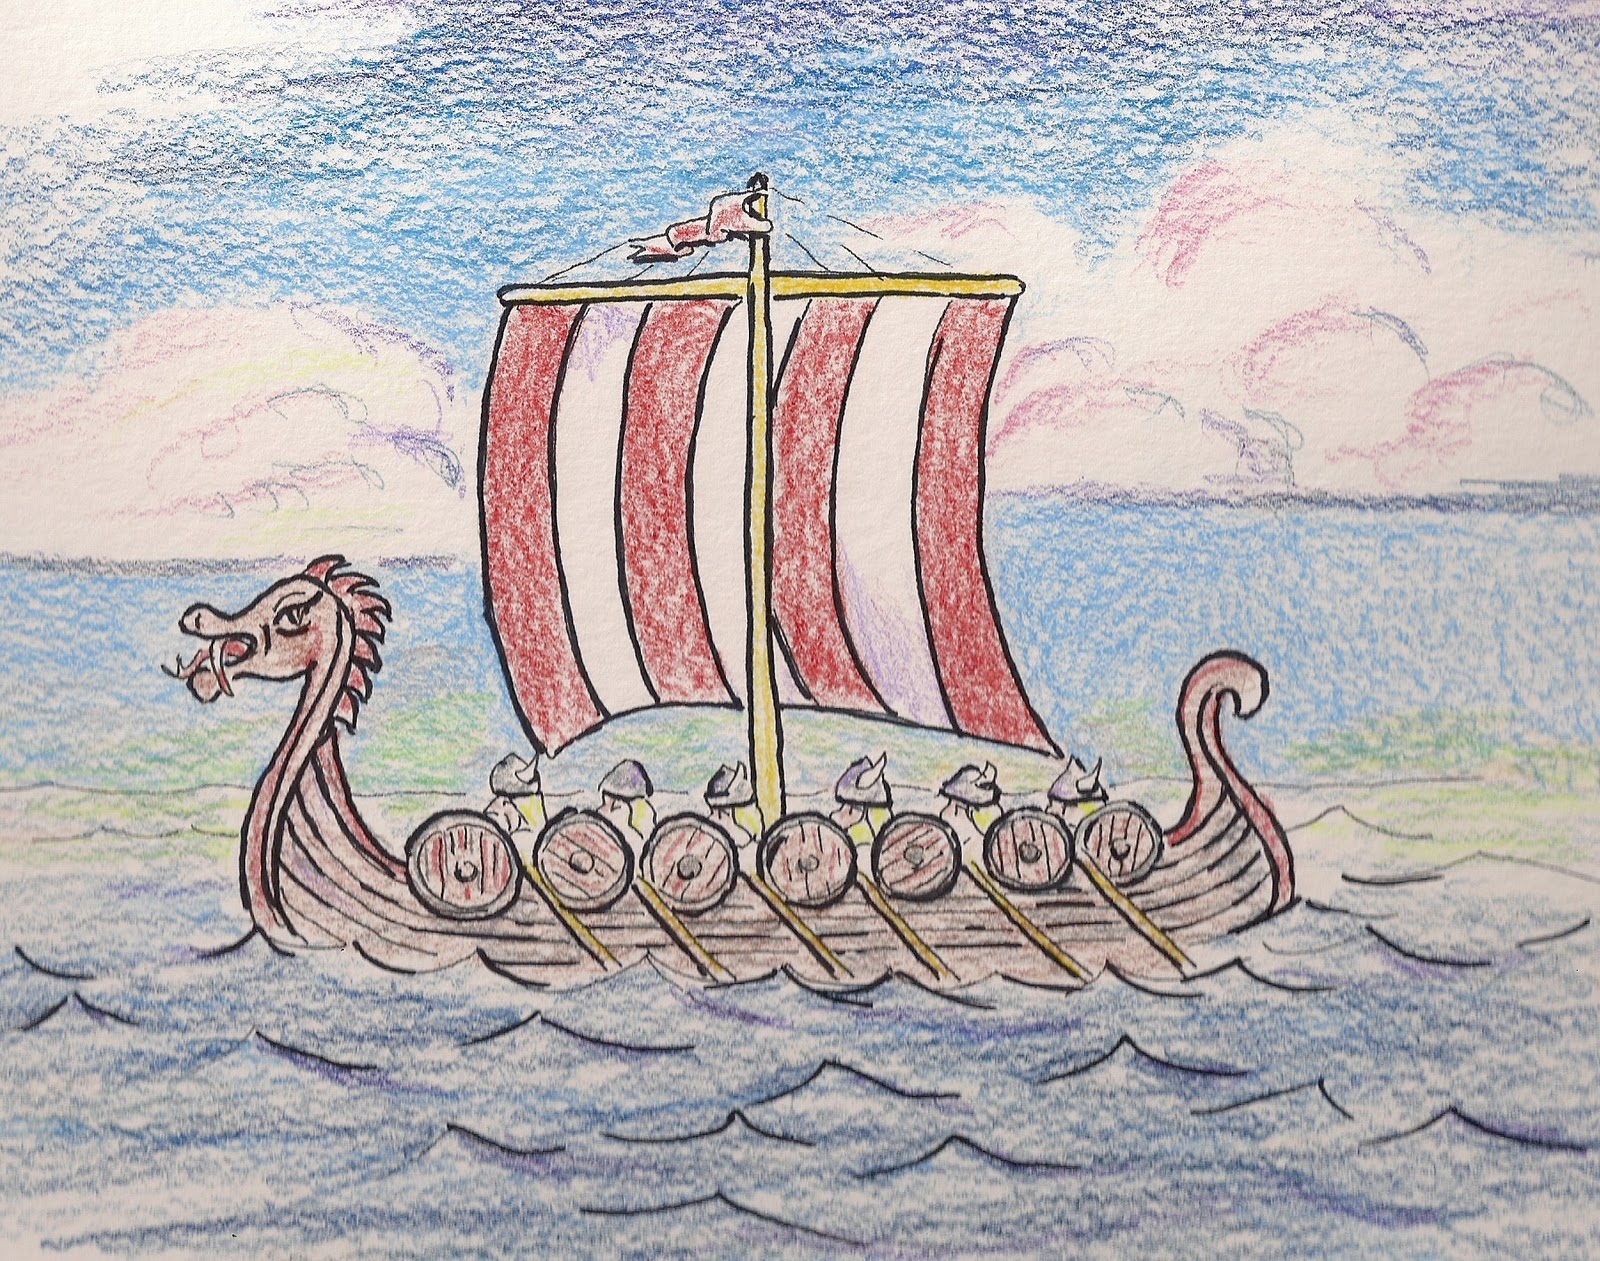 How to Draw Worksheets for The Young Artist: How to Draw a Viking Ship